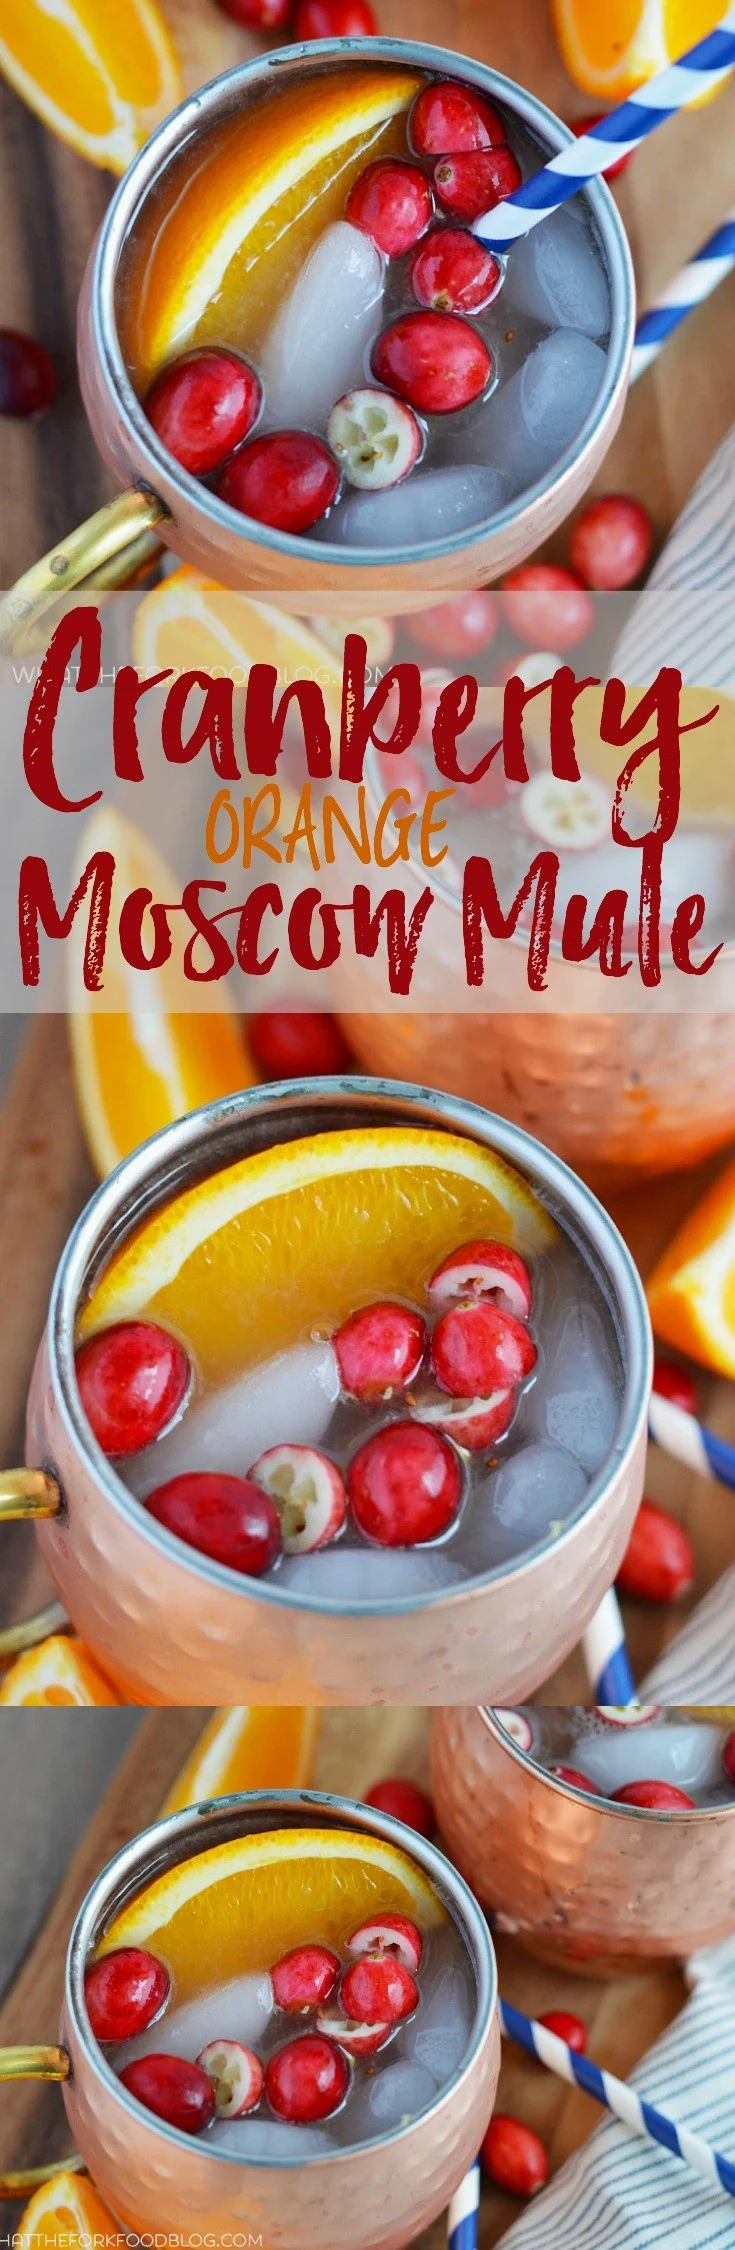 Cranberry Orange Moscow Mule from What The Fork Food Blog. A twist on the classic Moscow Mule, perfect for drinking all winter long. | whattheforkfoodblog.com #MoscowMule #Christmas #Thanksgiving #cocktails